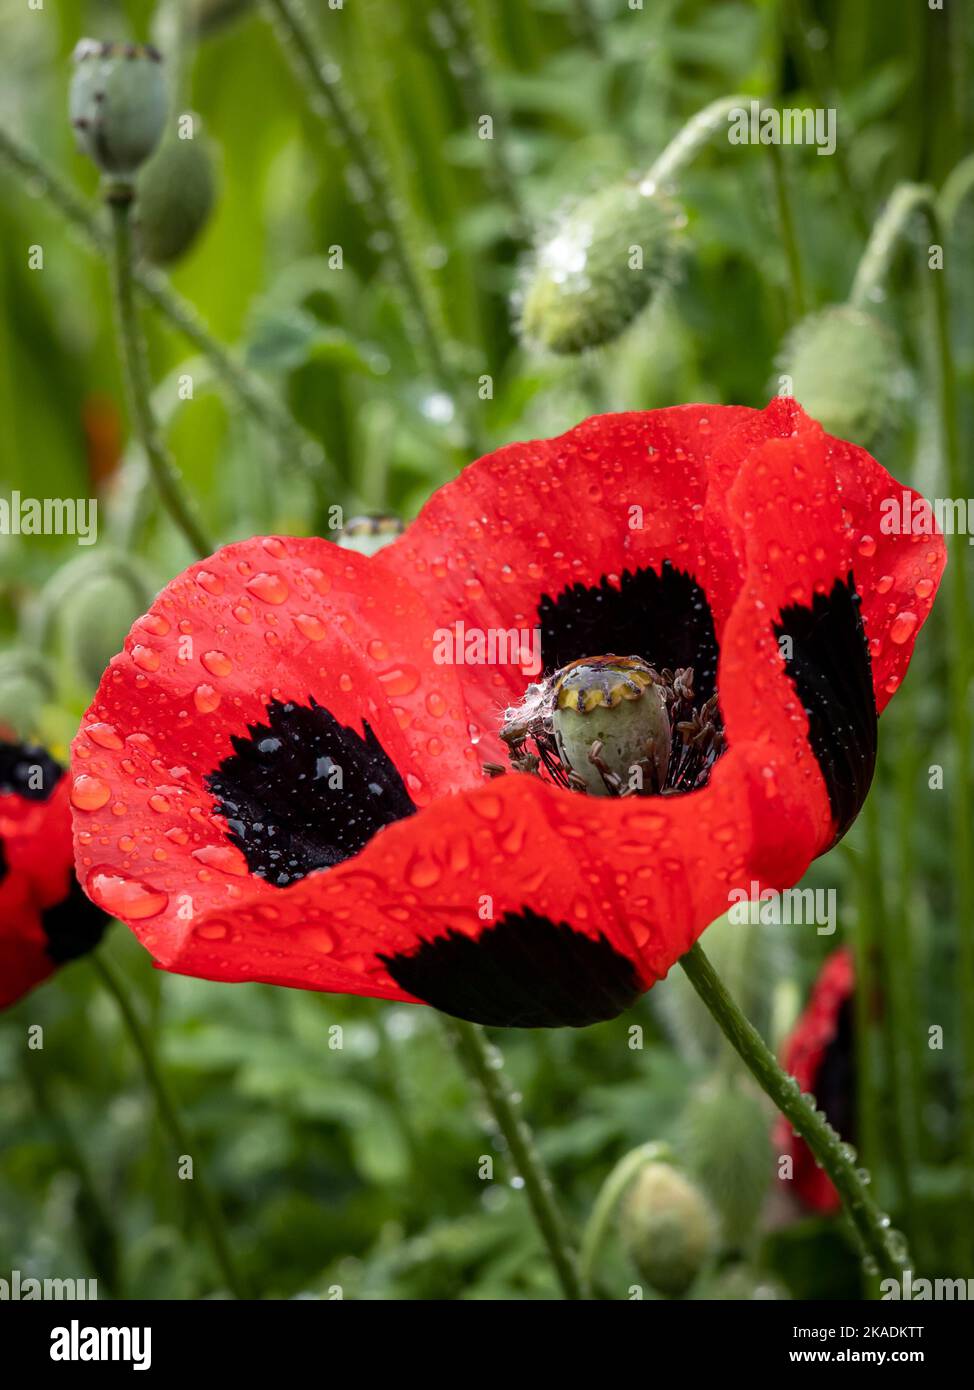 Red poppy flowers with black spots (Papaver commutatum 'Ladybird') wet after rain, blooming in the garden. Stock Photo